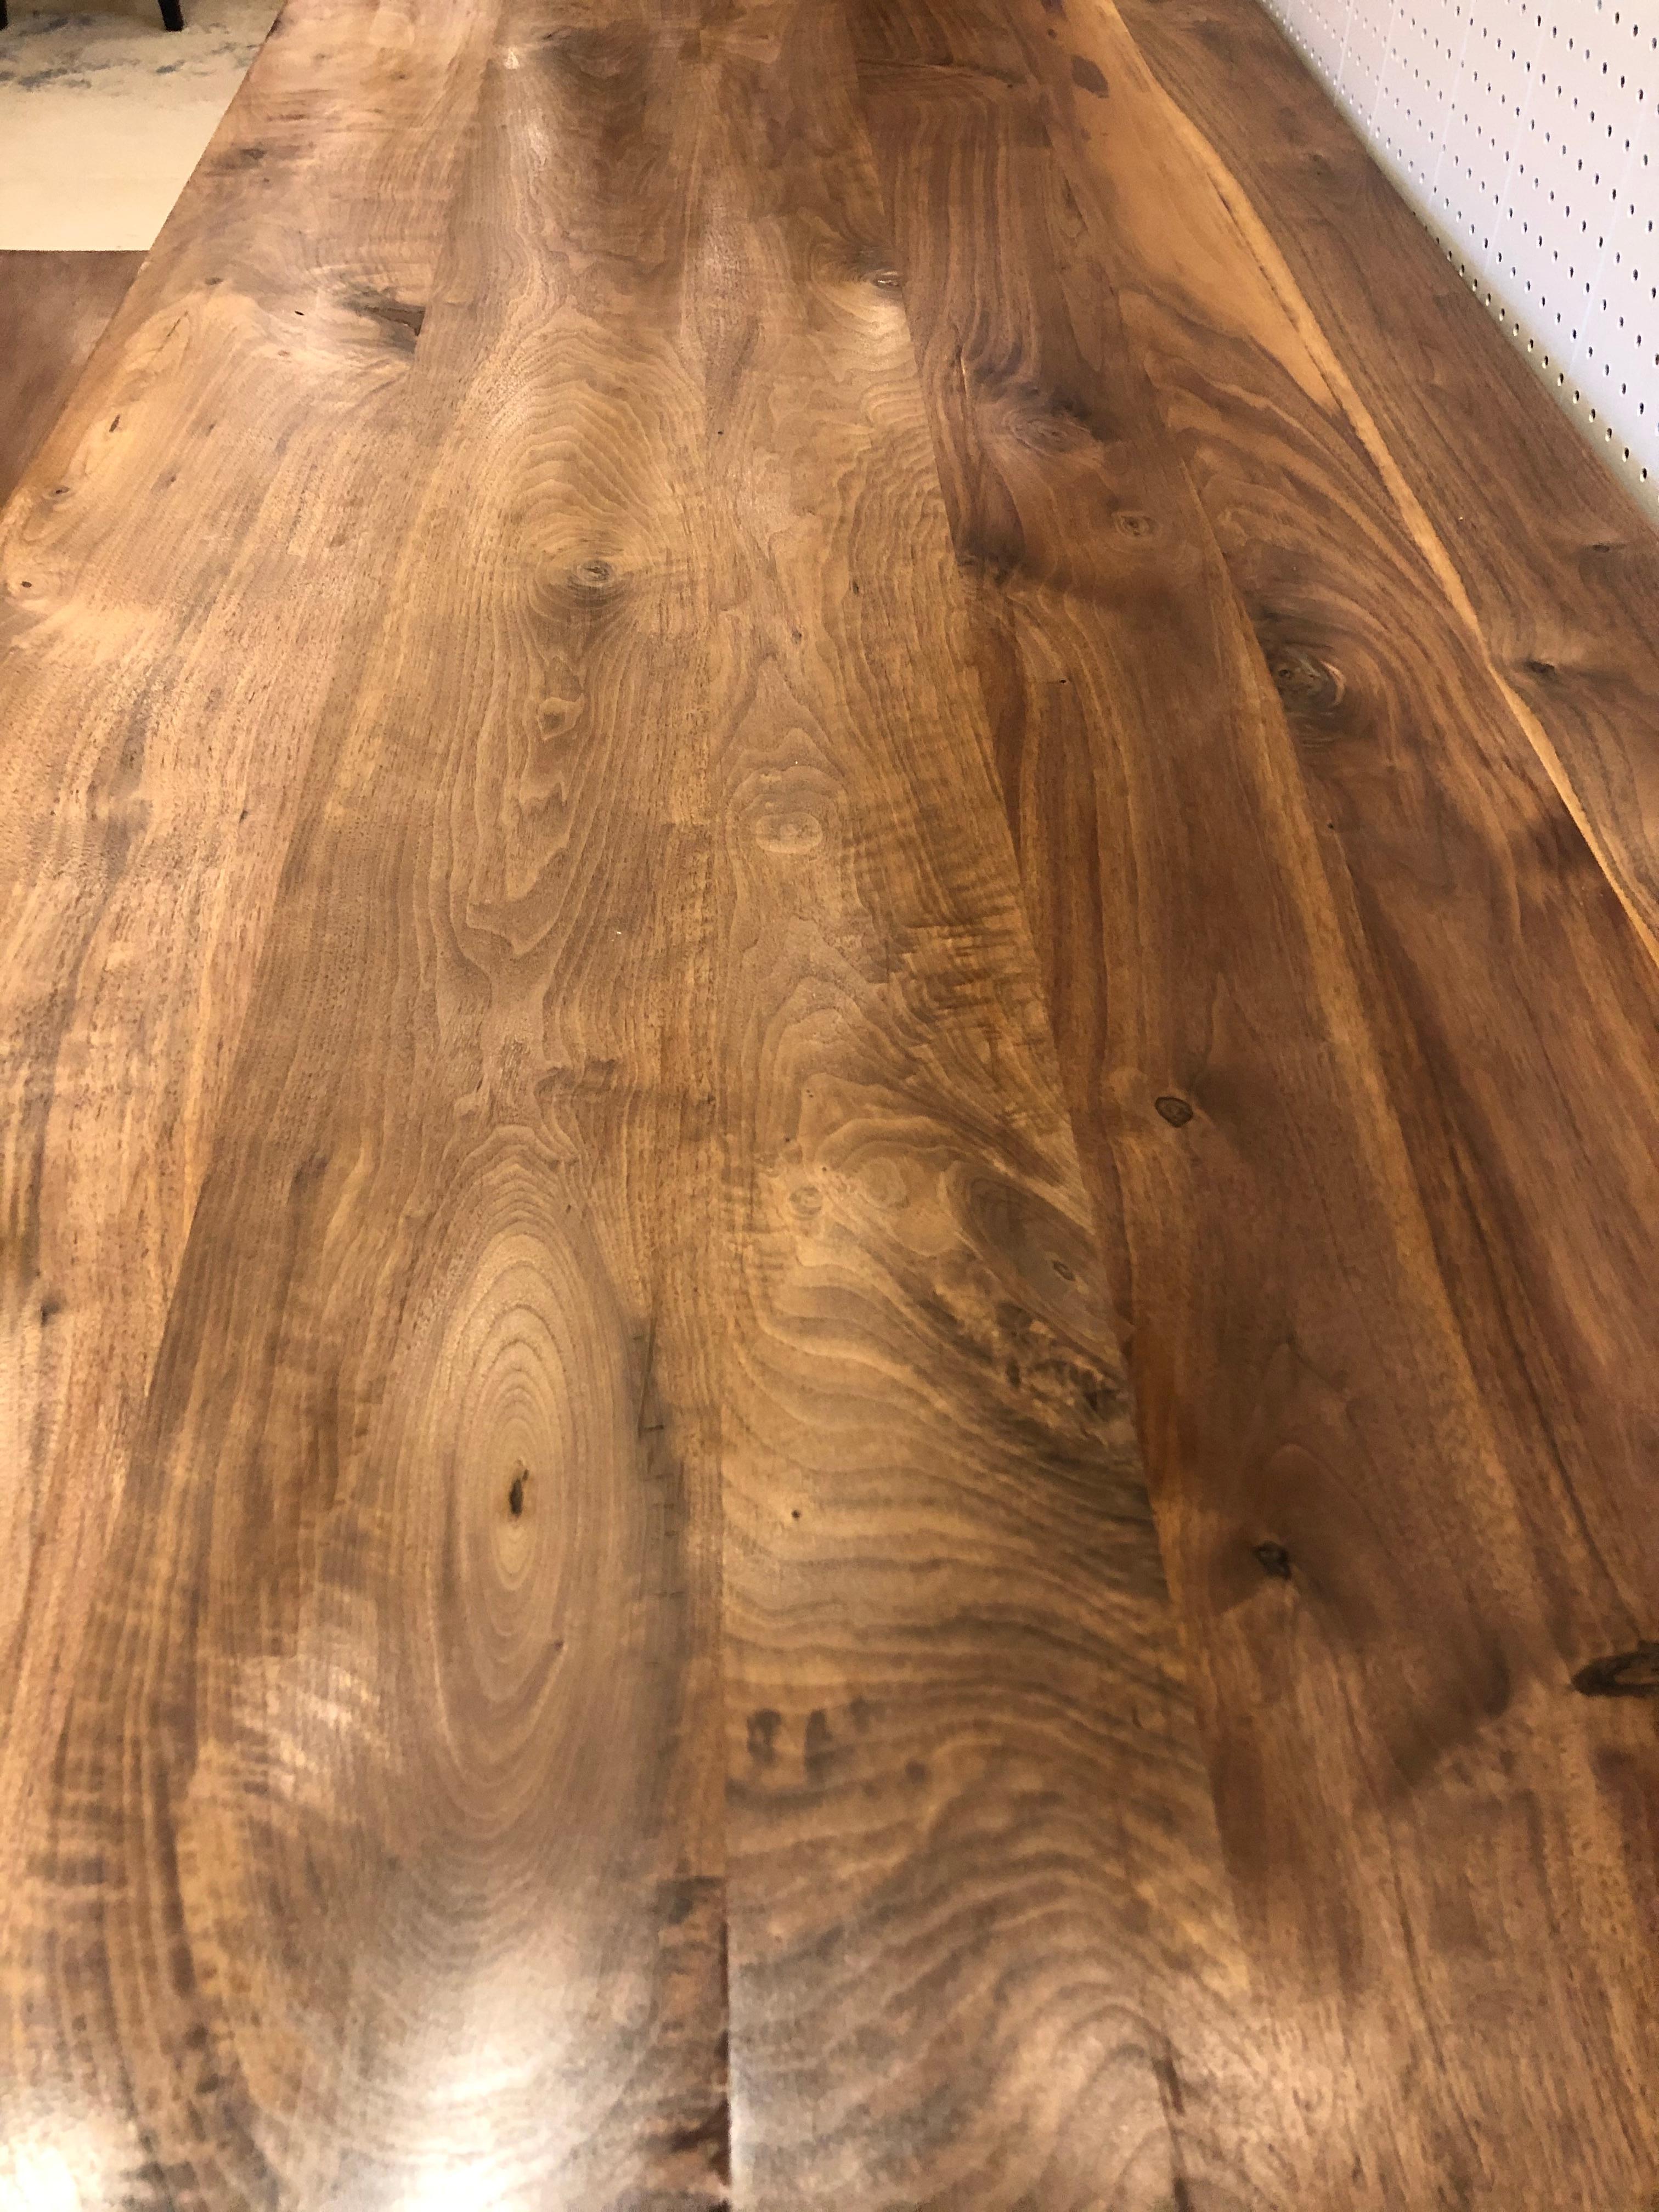 Hand crafted black walnut slab farm table having gorgeous grain and simple black ebonized apron and straight legs.
Custom bench available for $650
Measures: 60 L x x 19 H.